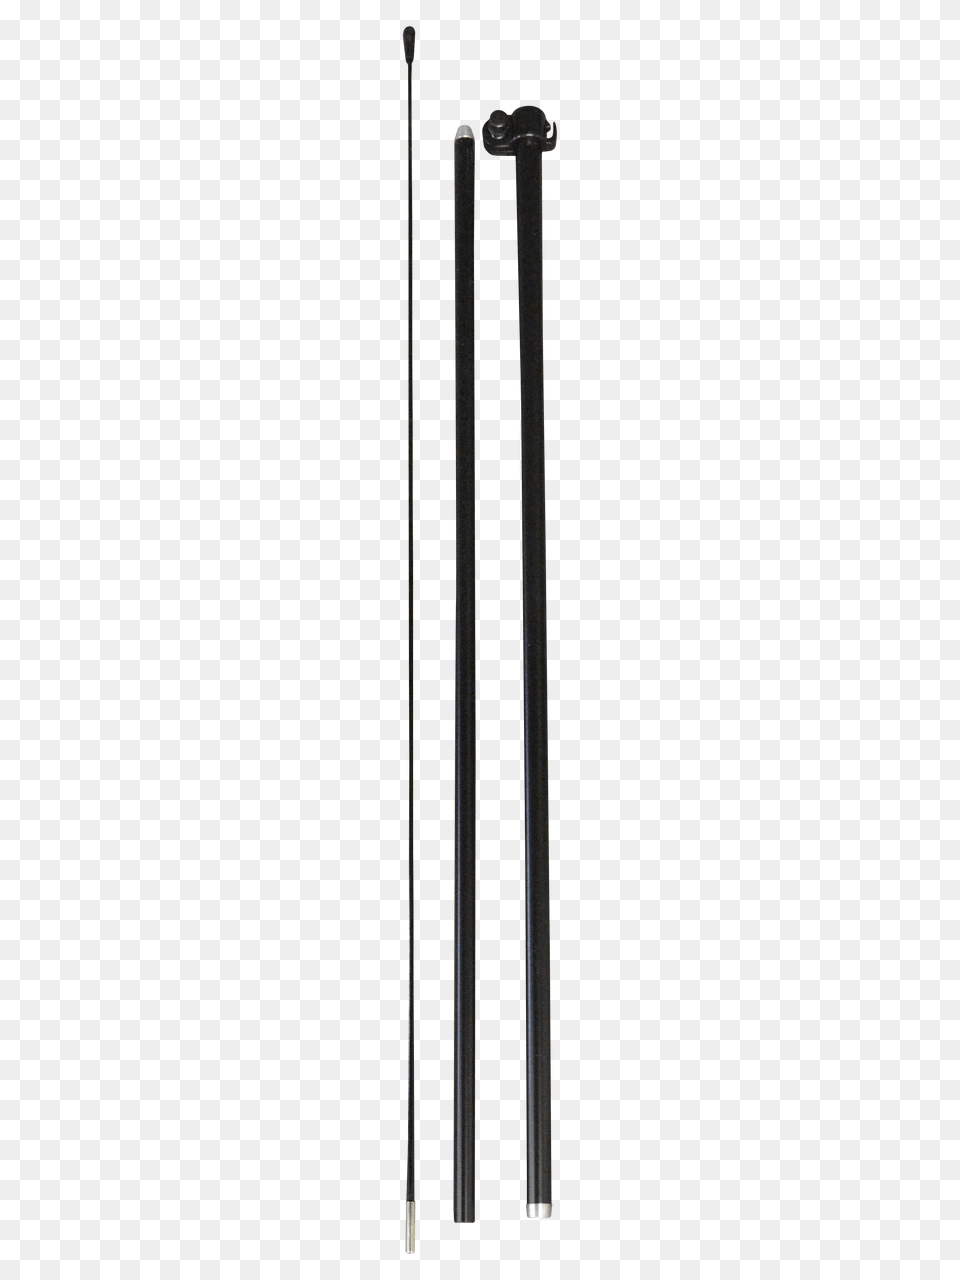 Small Feather Flag Pole Set With Carry Bag, Stick, Sword, Weapon Png Image